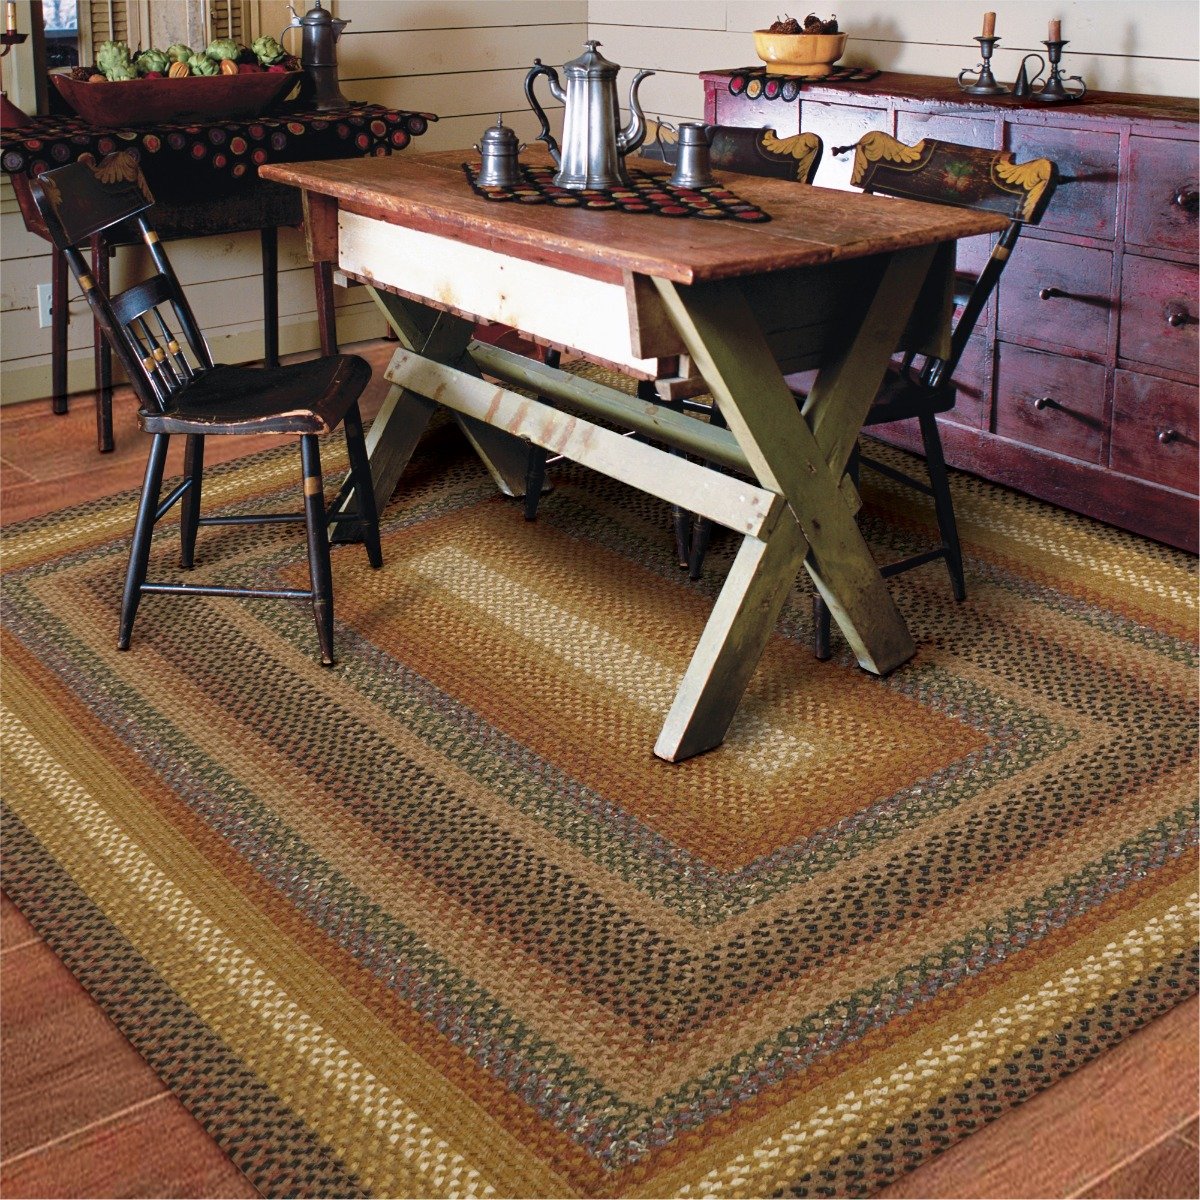 Peppercorn Cotton Braided Rugs by Homespice Decor - Lake Erie Gifts & Decor